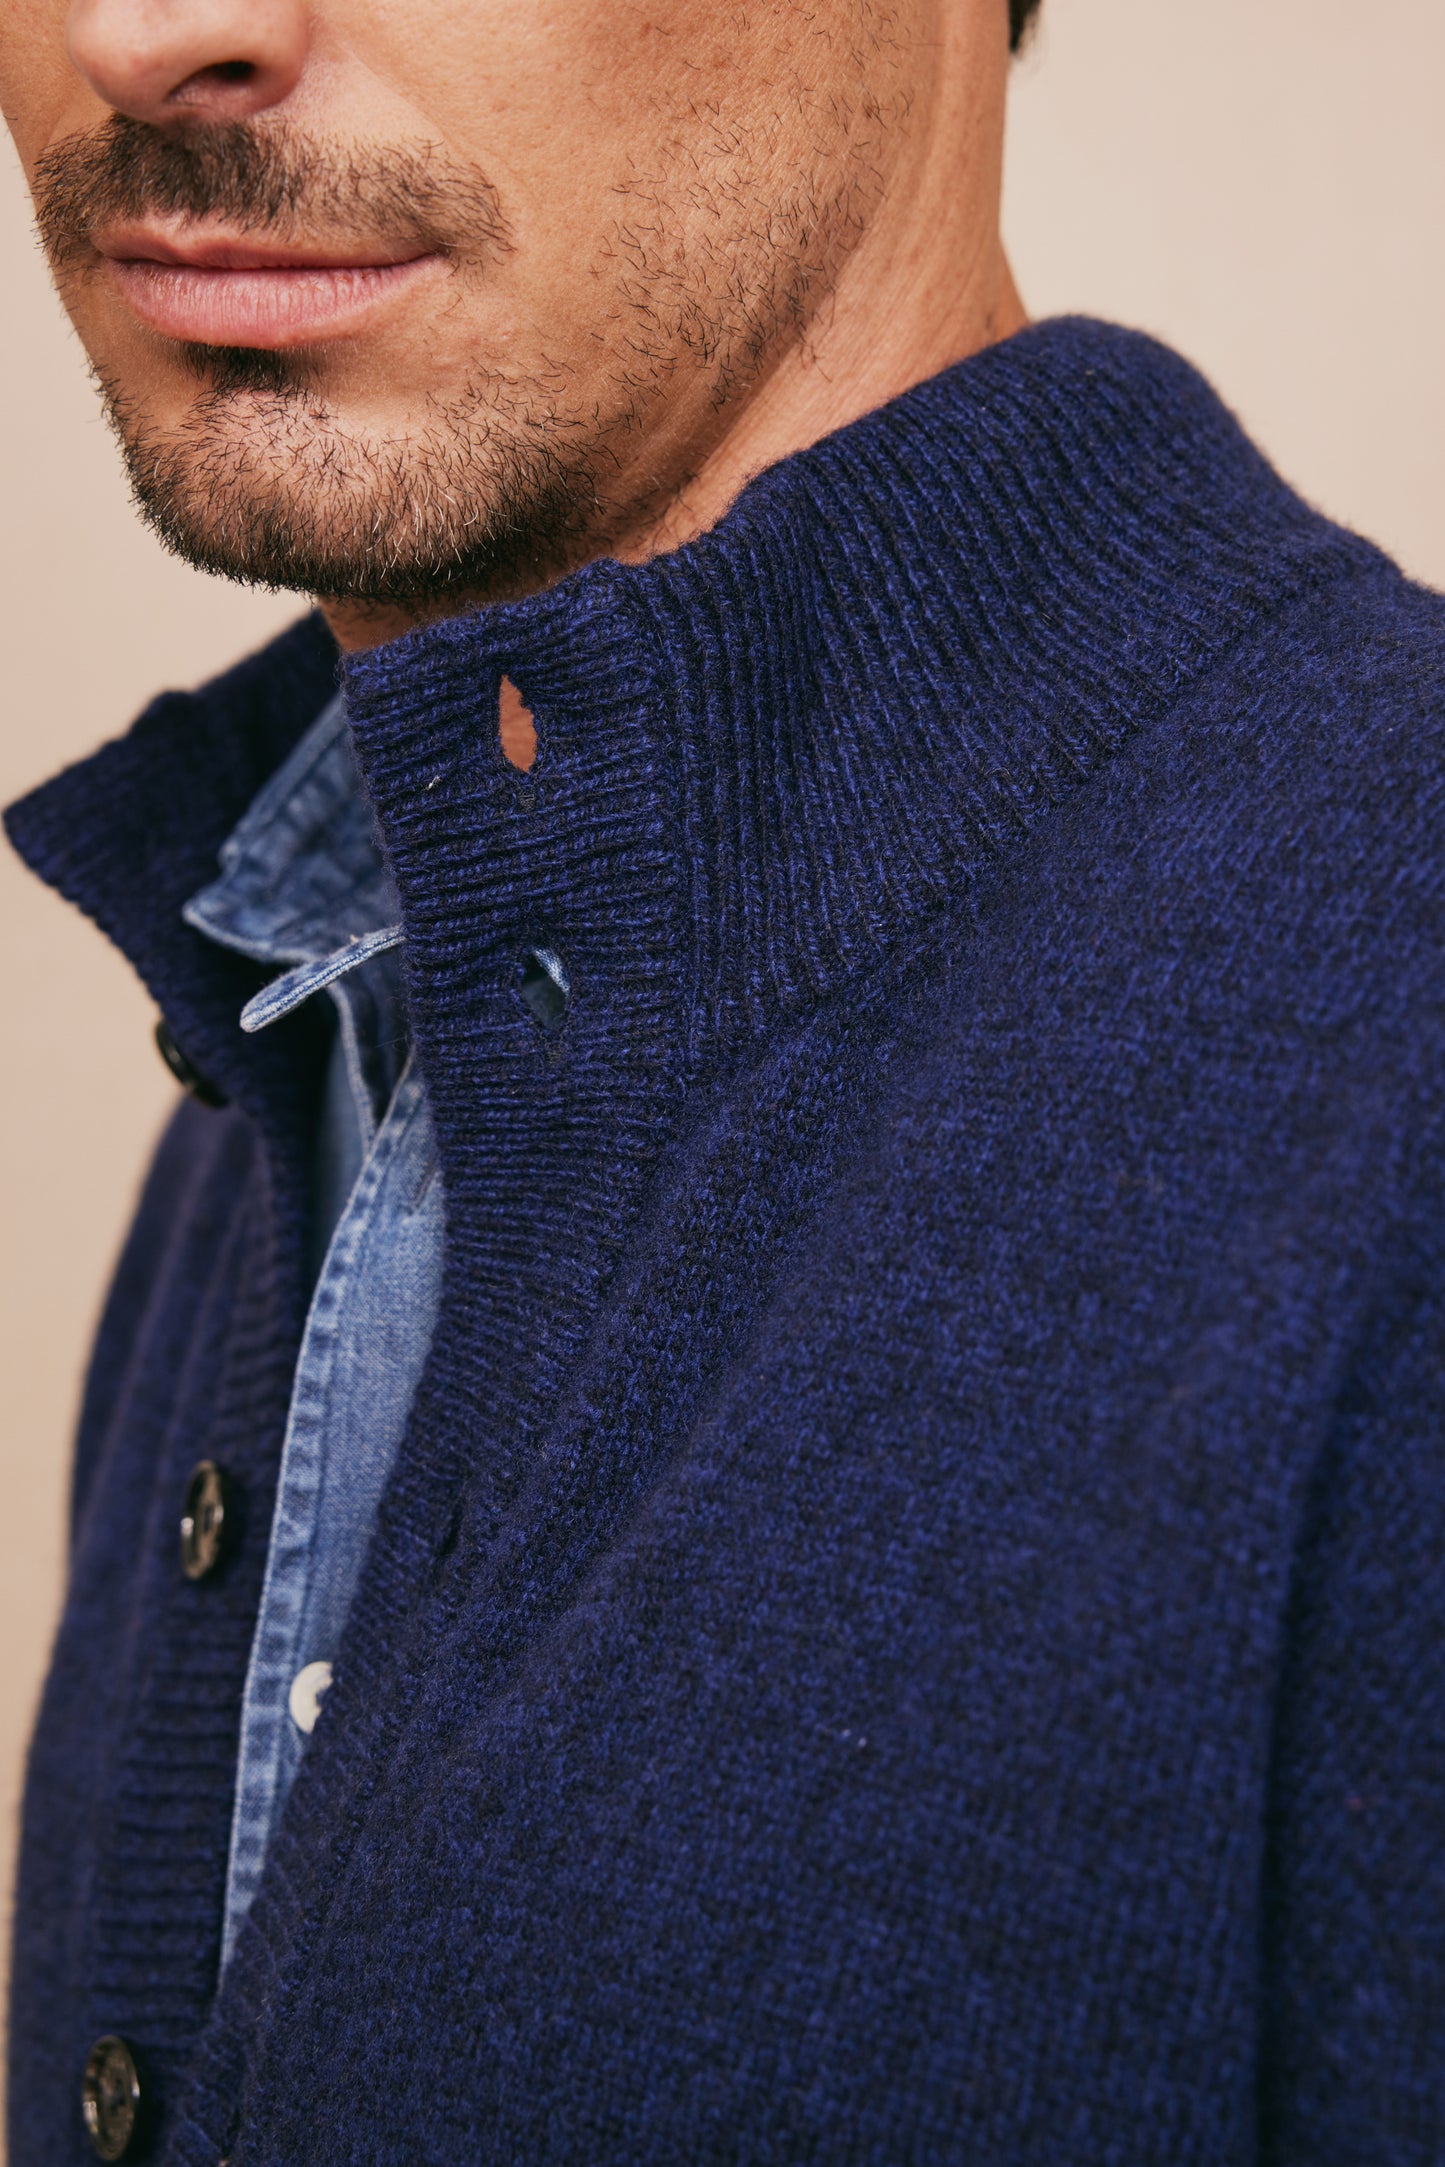 WOOL AND CASHMERE CARDIGAN NAVY